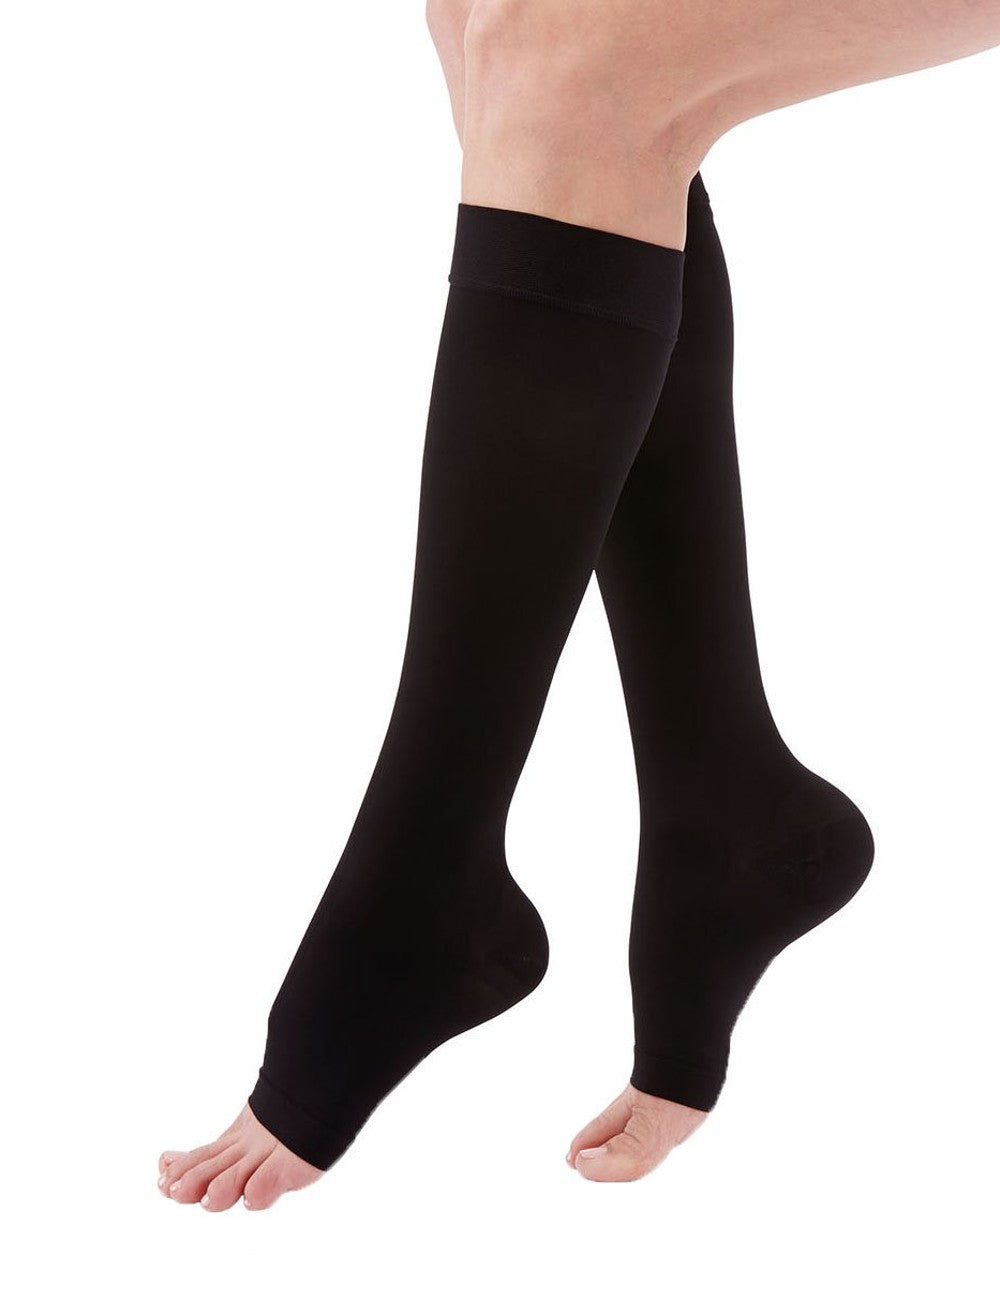 Medi Duomed Open-Toe Knee High Black Compression Stockings (Free Shipping)  – BodyHeal